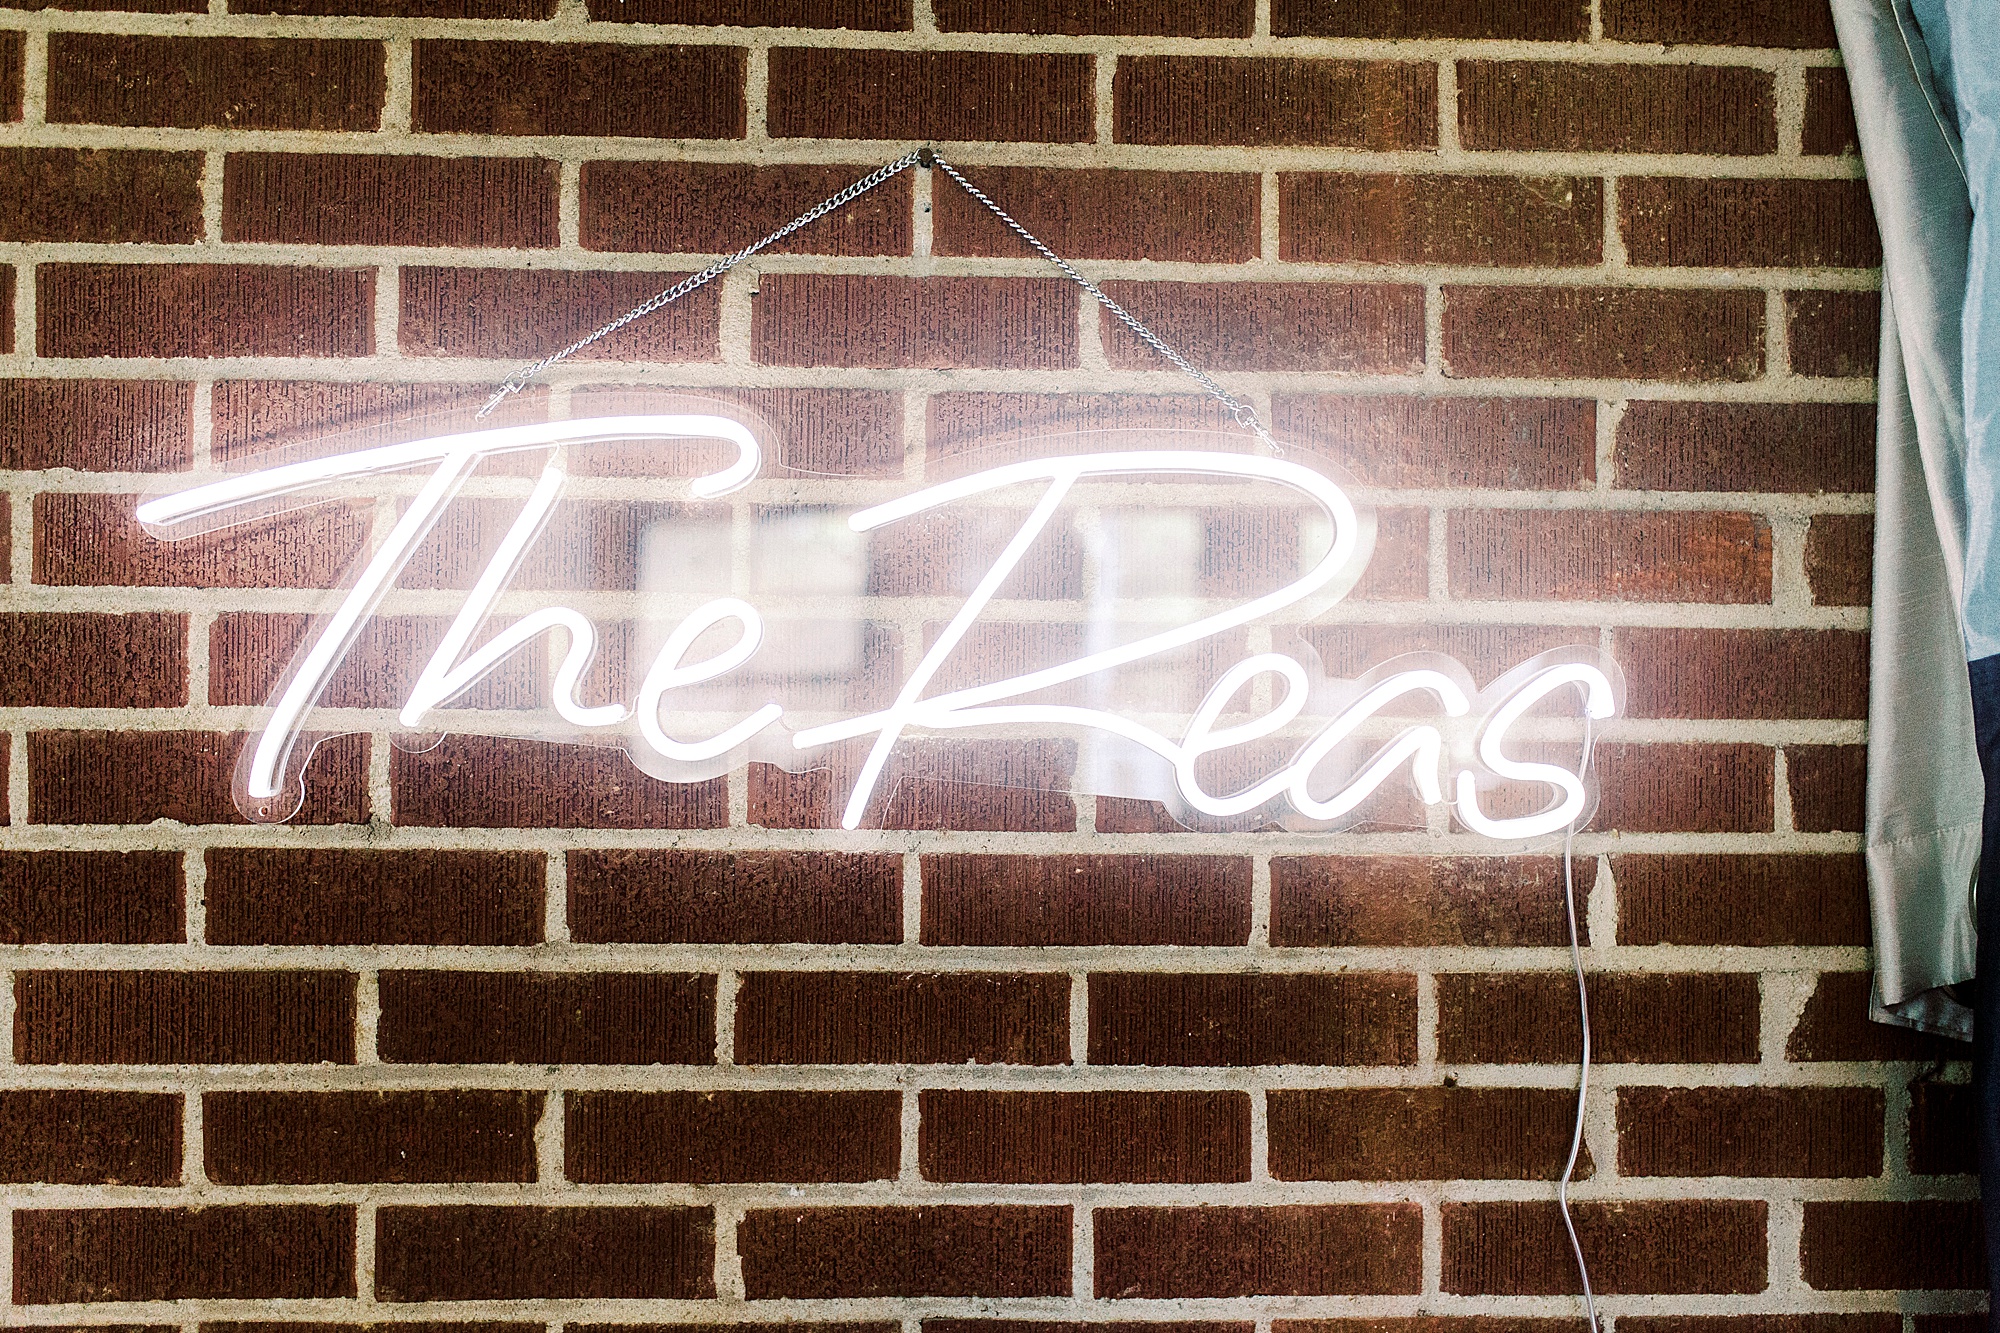 neon sign at Fort Mill SC wedding reception